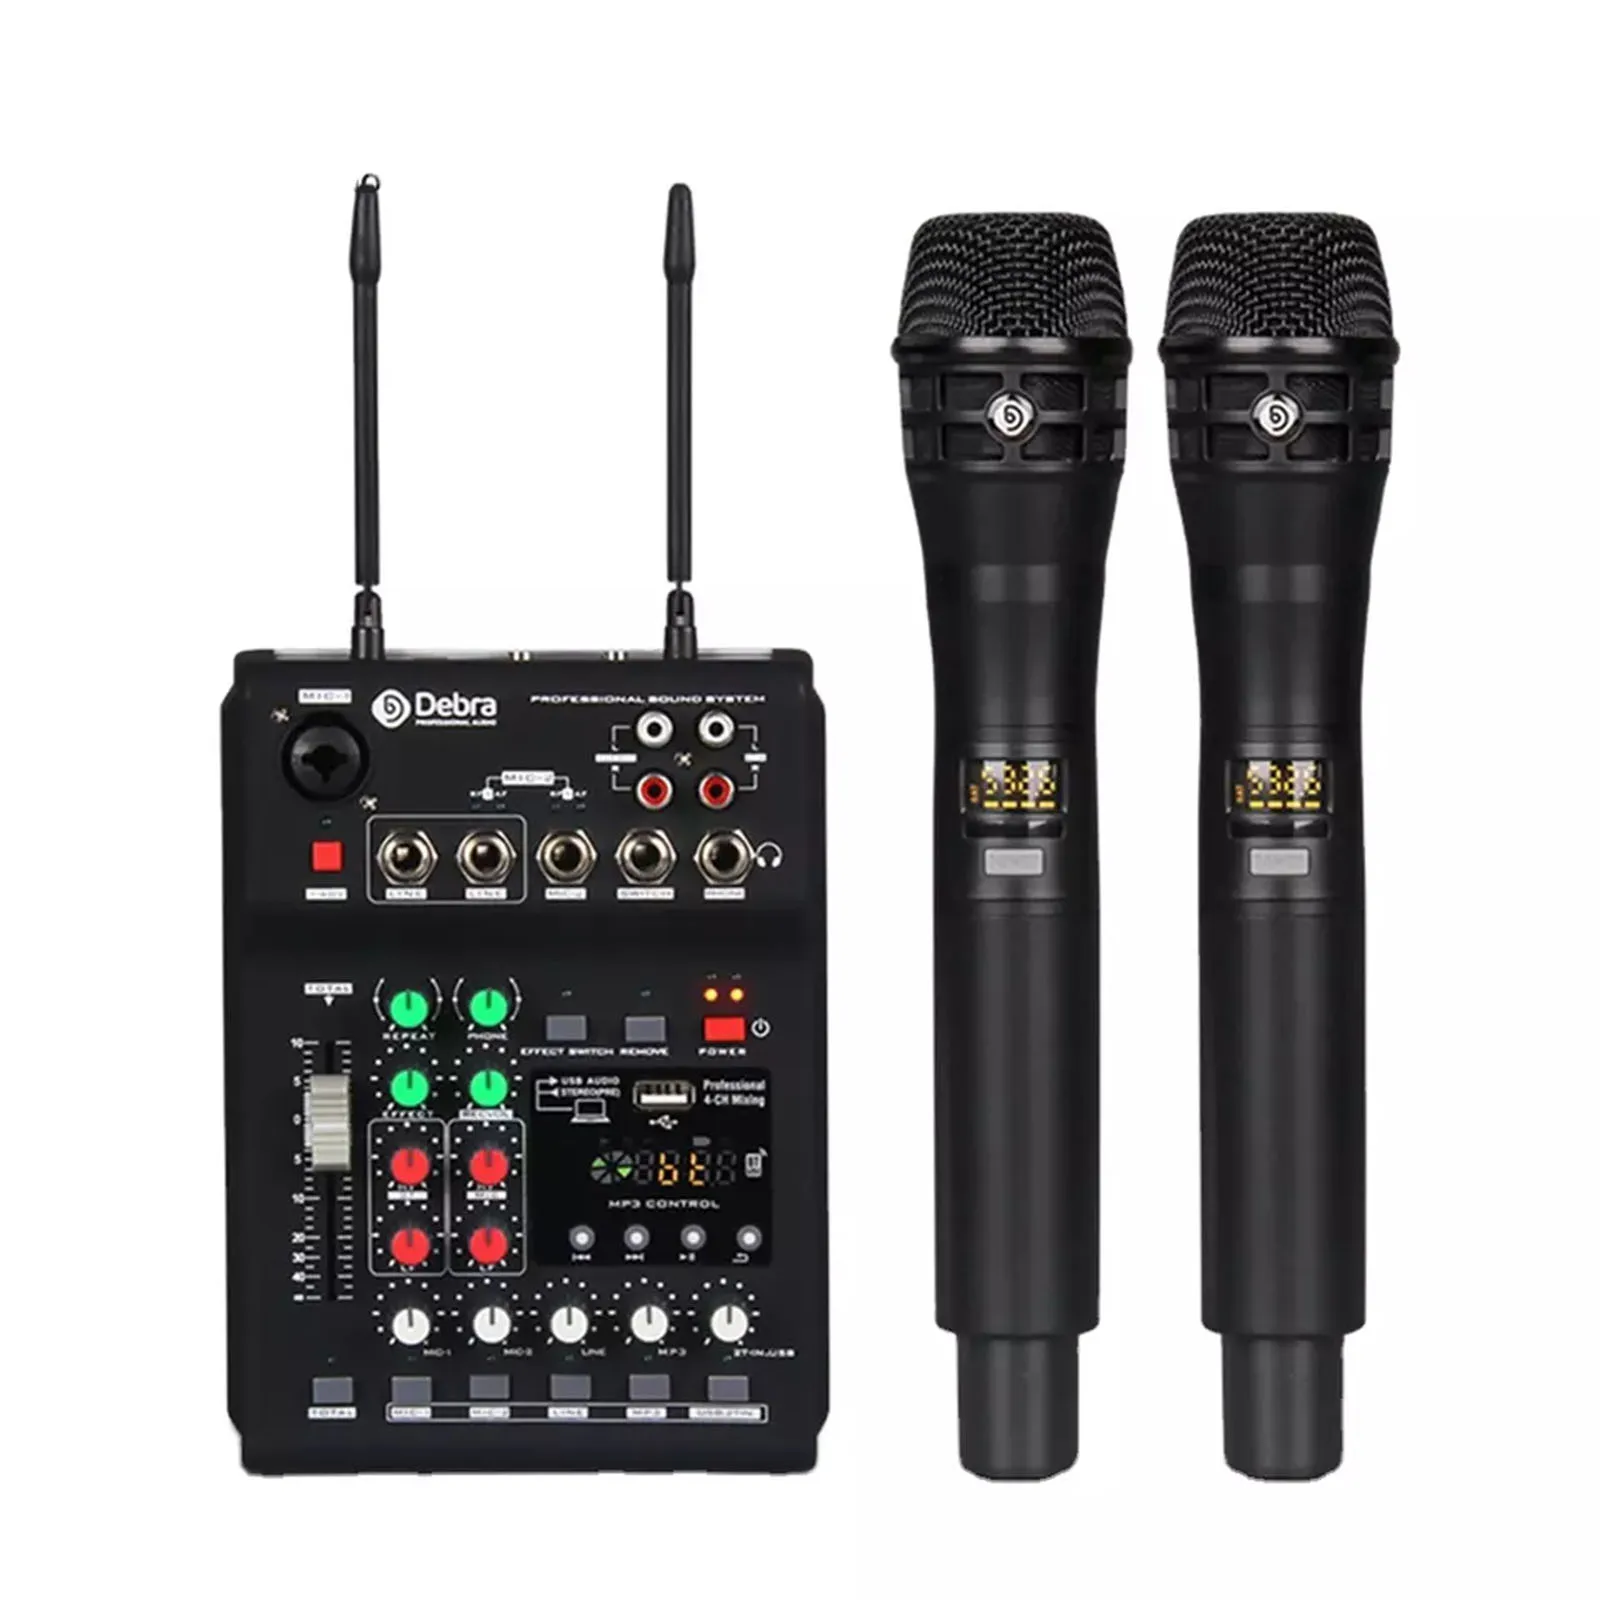 

Audio Uhf Dual Channel Wireless Microphone Audio Mixer Set with Usb Bt5.0 Reverb for Smartphone Recording Karaoke Ktv